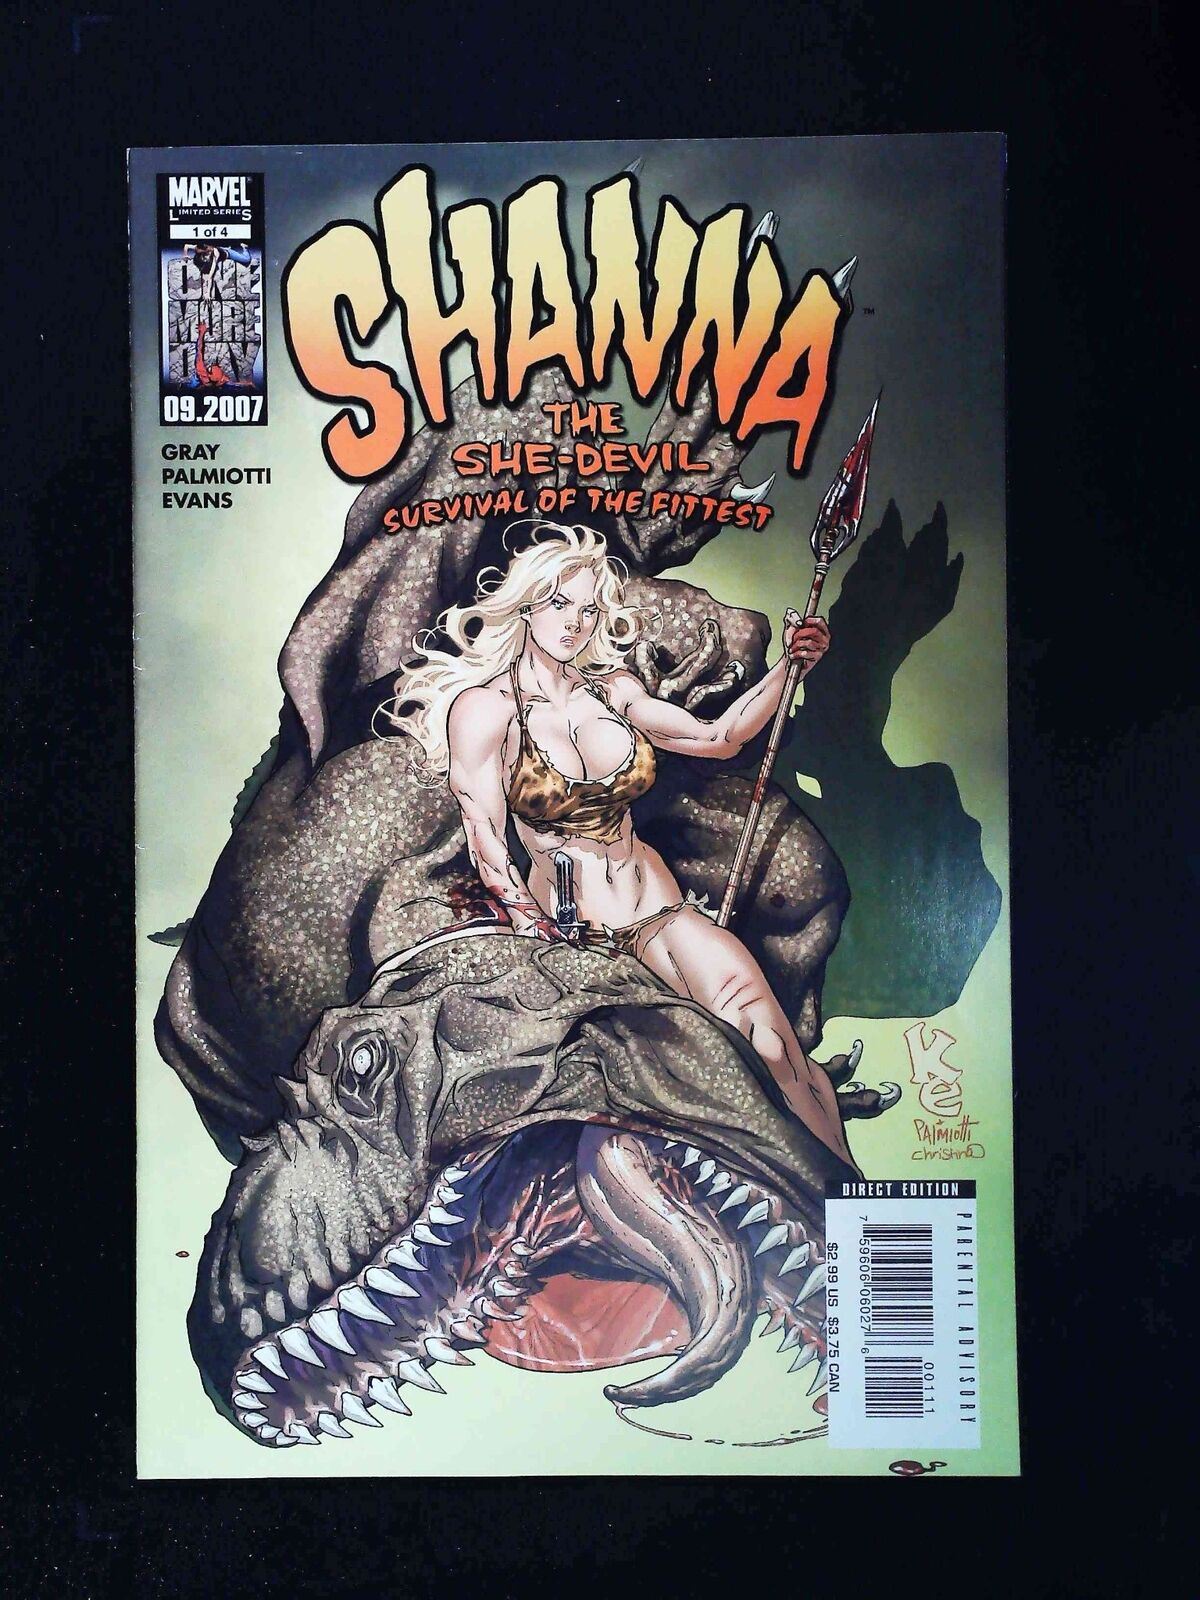 Shanna The She-Devil Survival Of The Fittest #1  Marvel Comics 2007 Vf+